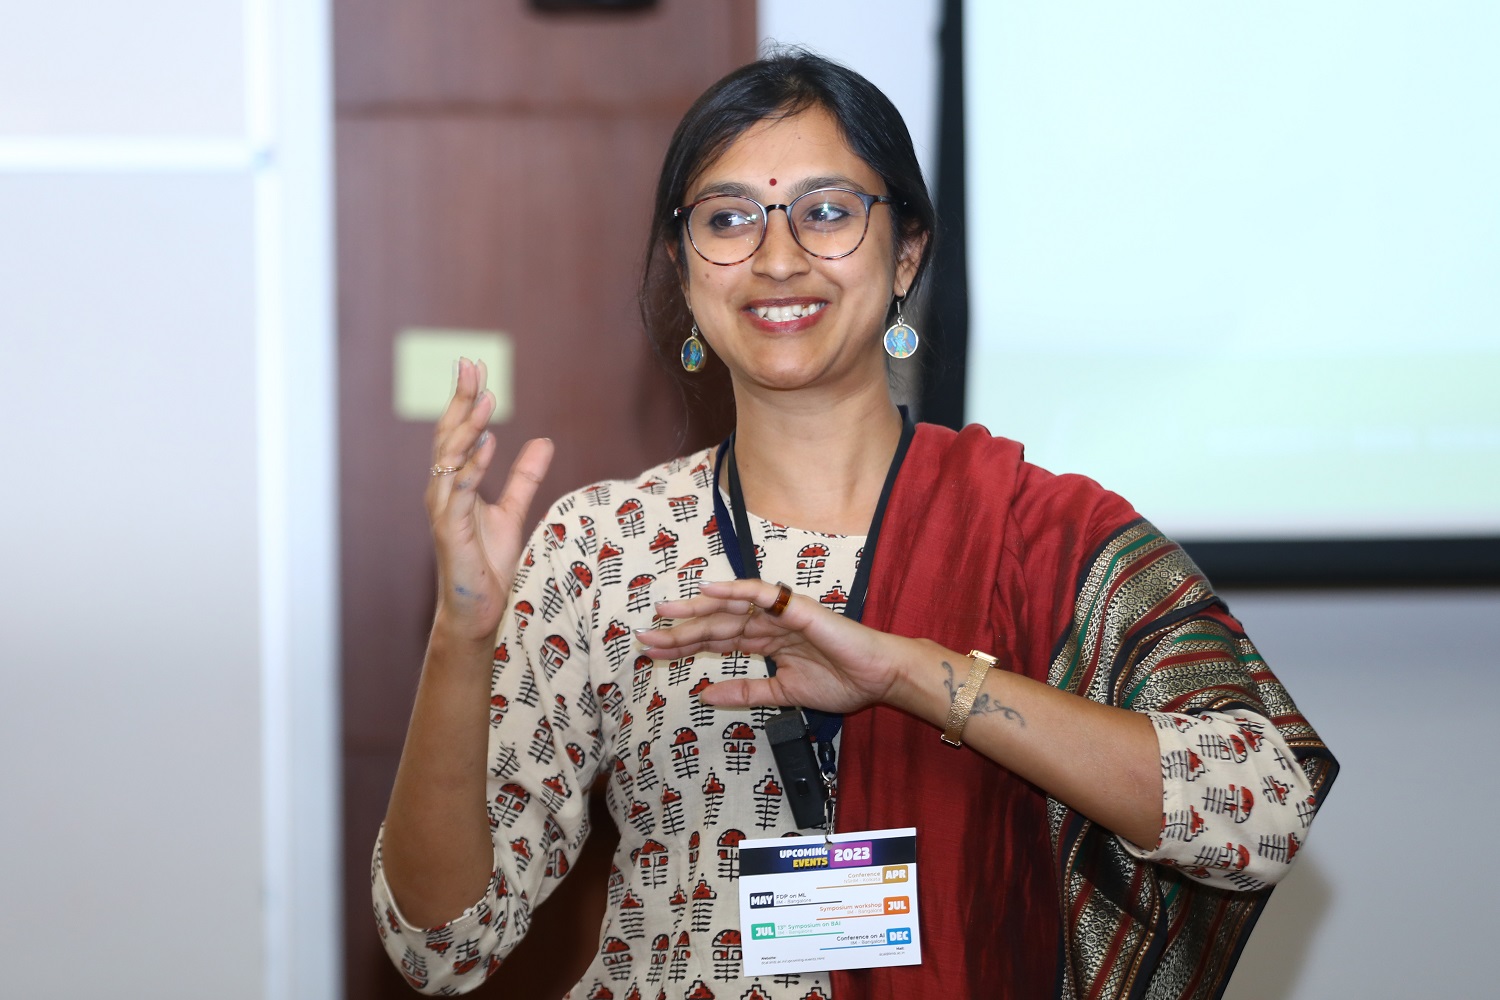 Shirsha Ray Chaudhuri, Director of Engineering - TR Labs, Thomson Reuters, spoke on 'Transformation with AI-ML Systems' at WiDS Bengaluru Conference.